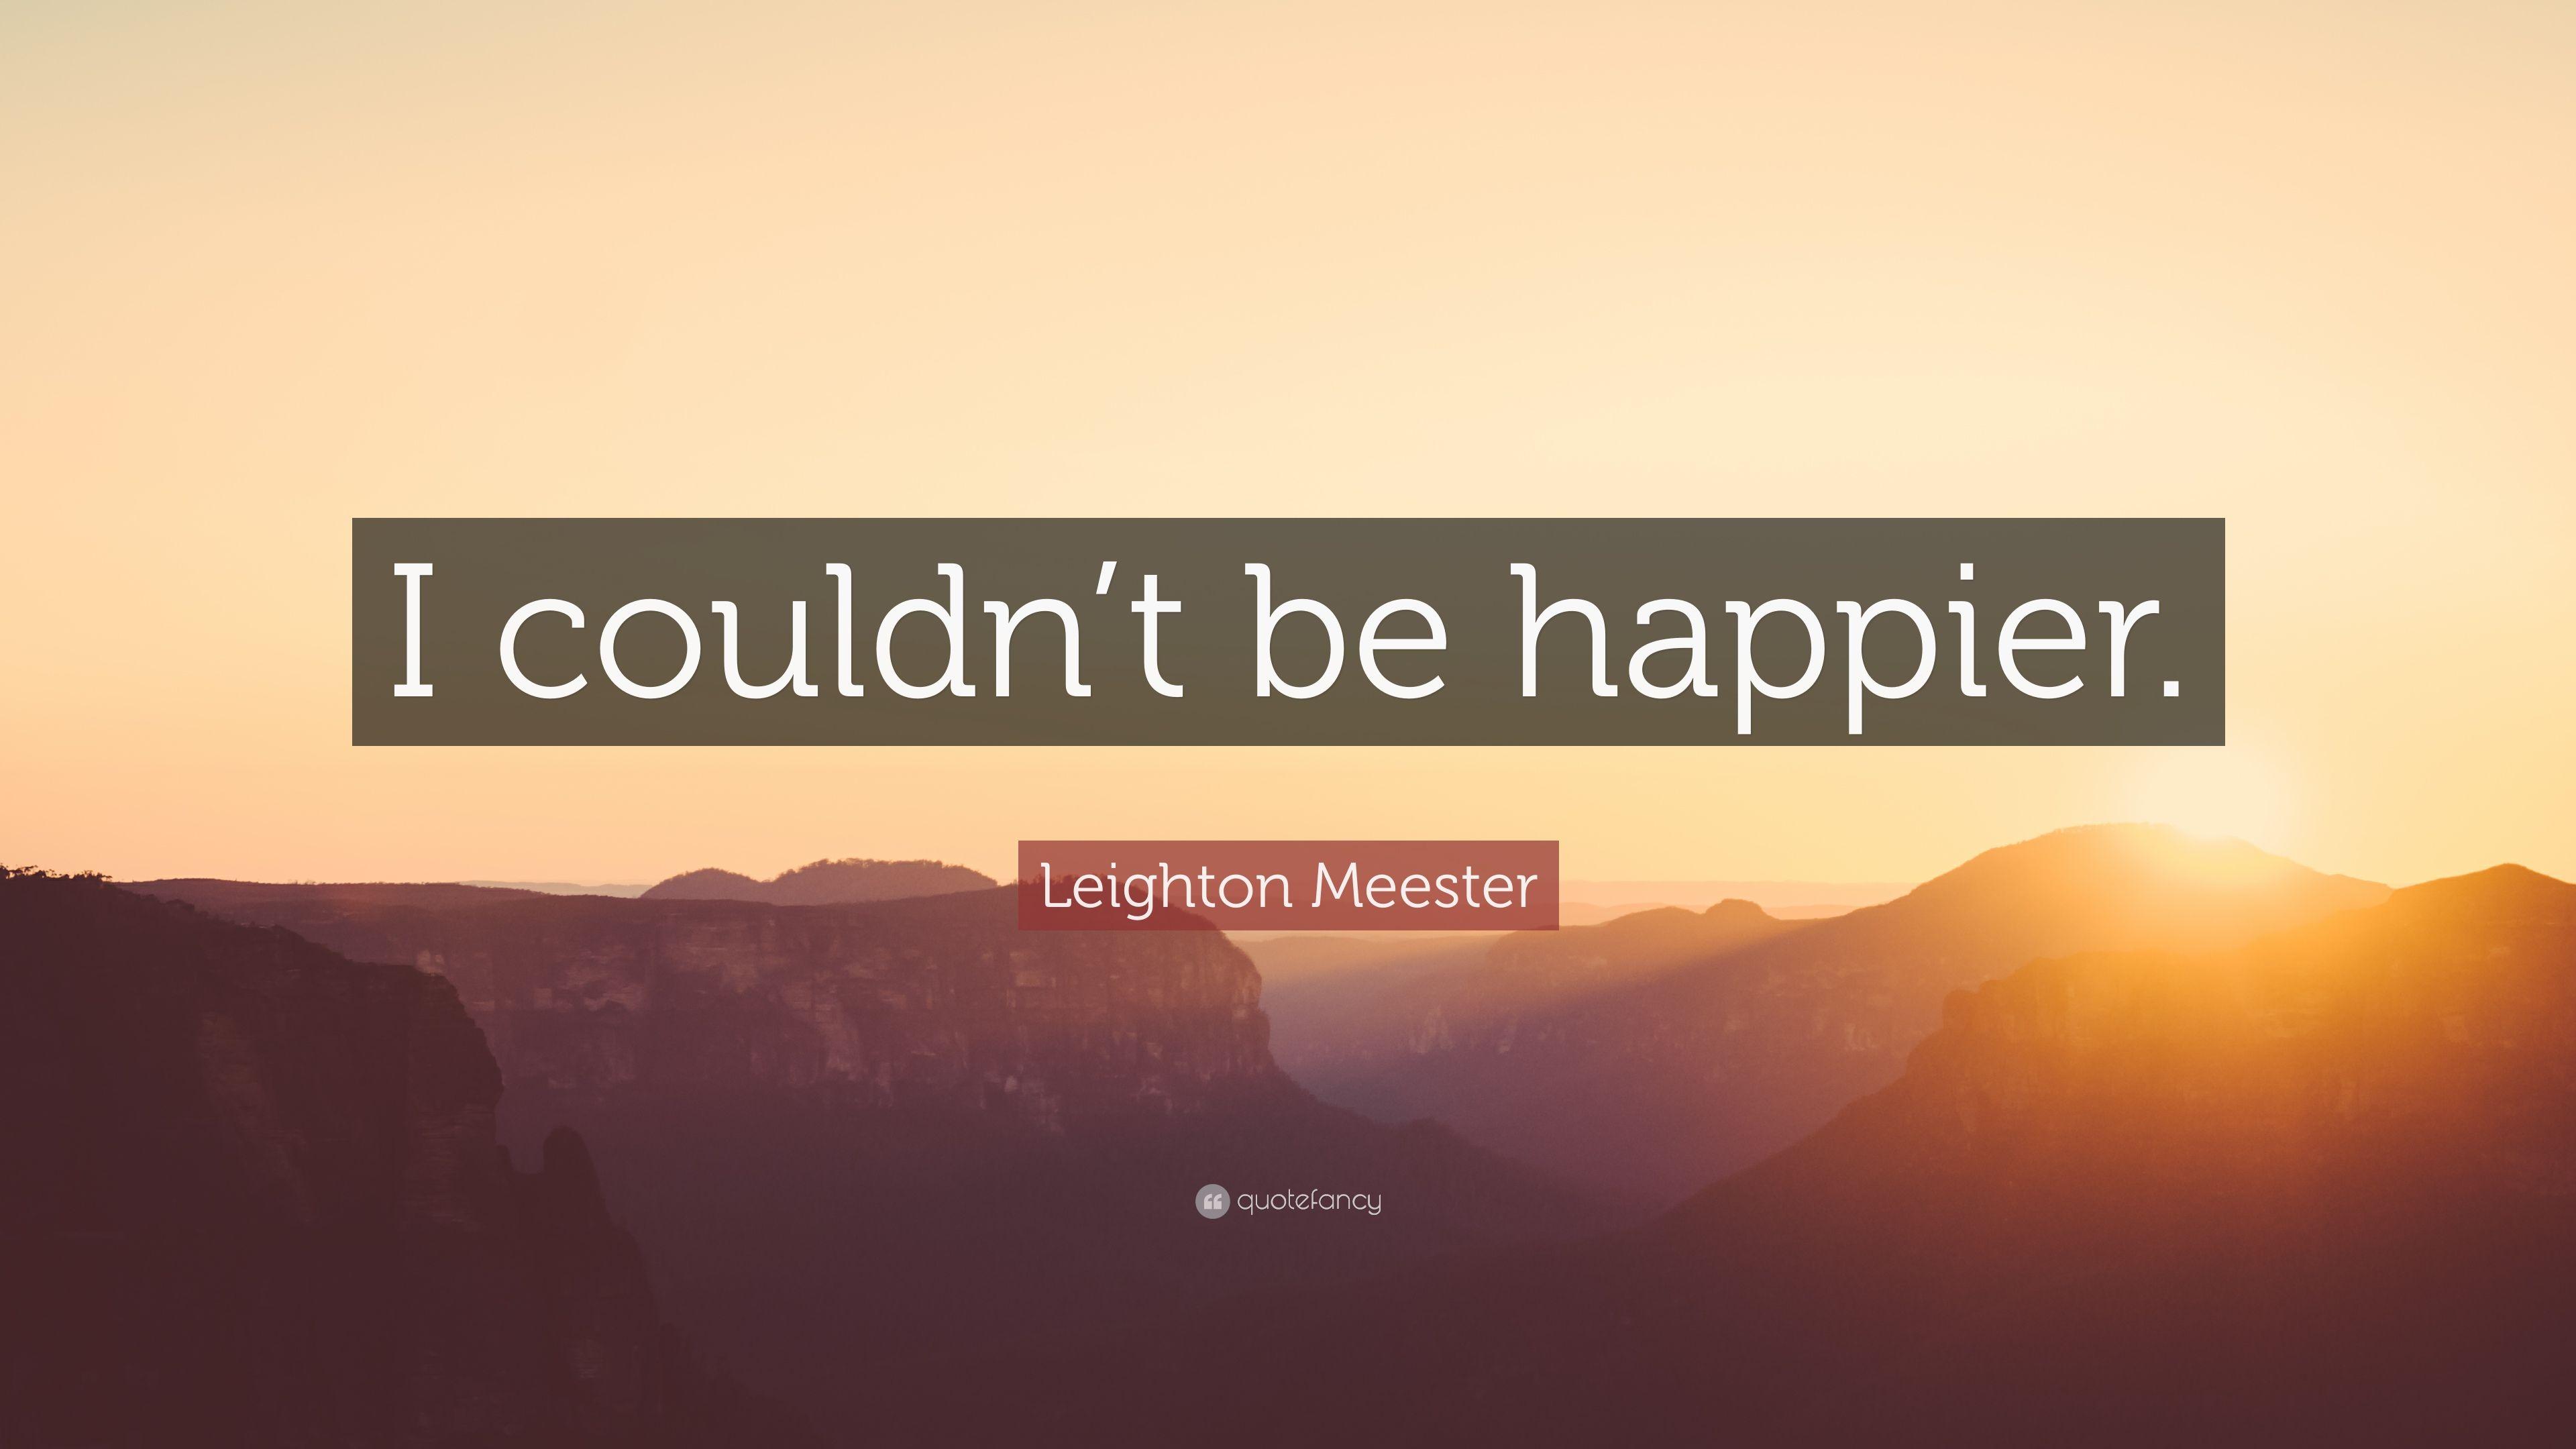 Leighton Meester Quote: “I couldn't be happier.” 7 wallpaper